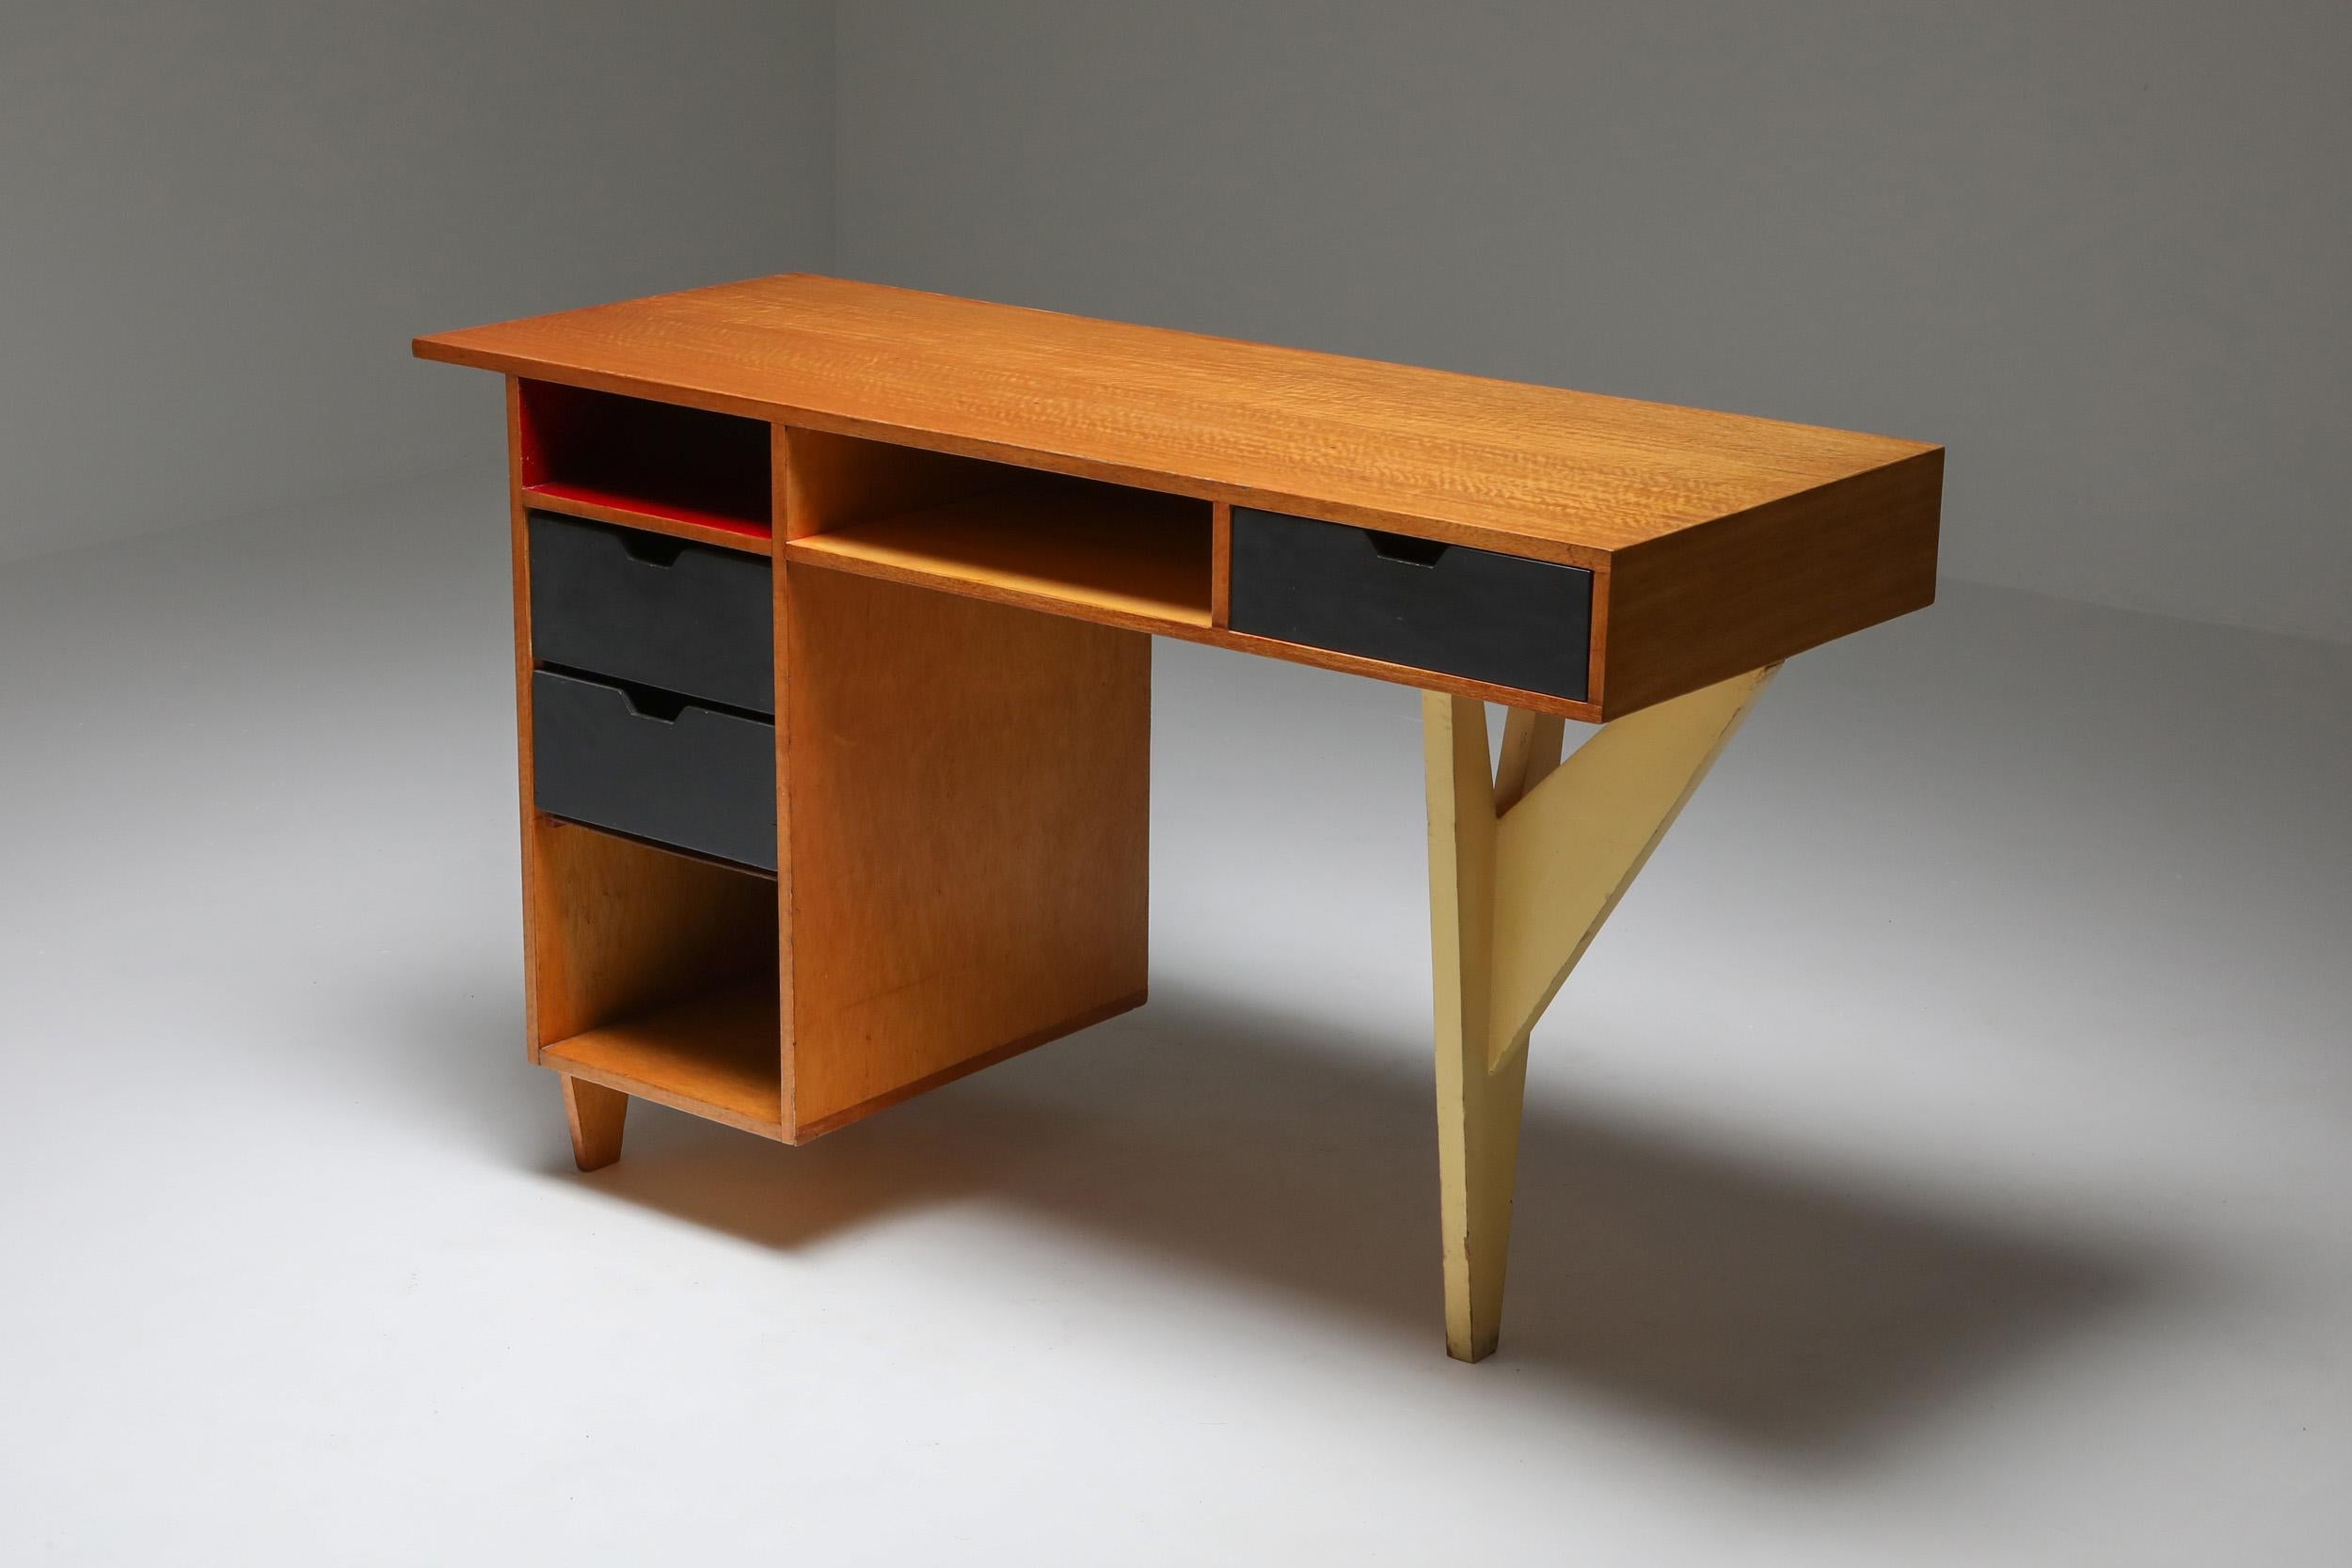 Authentic Dutch historical design piece from the 1950s

Great use of color that's typical for the 1950s
Birch veneer.
 